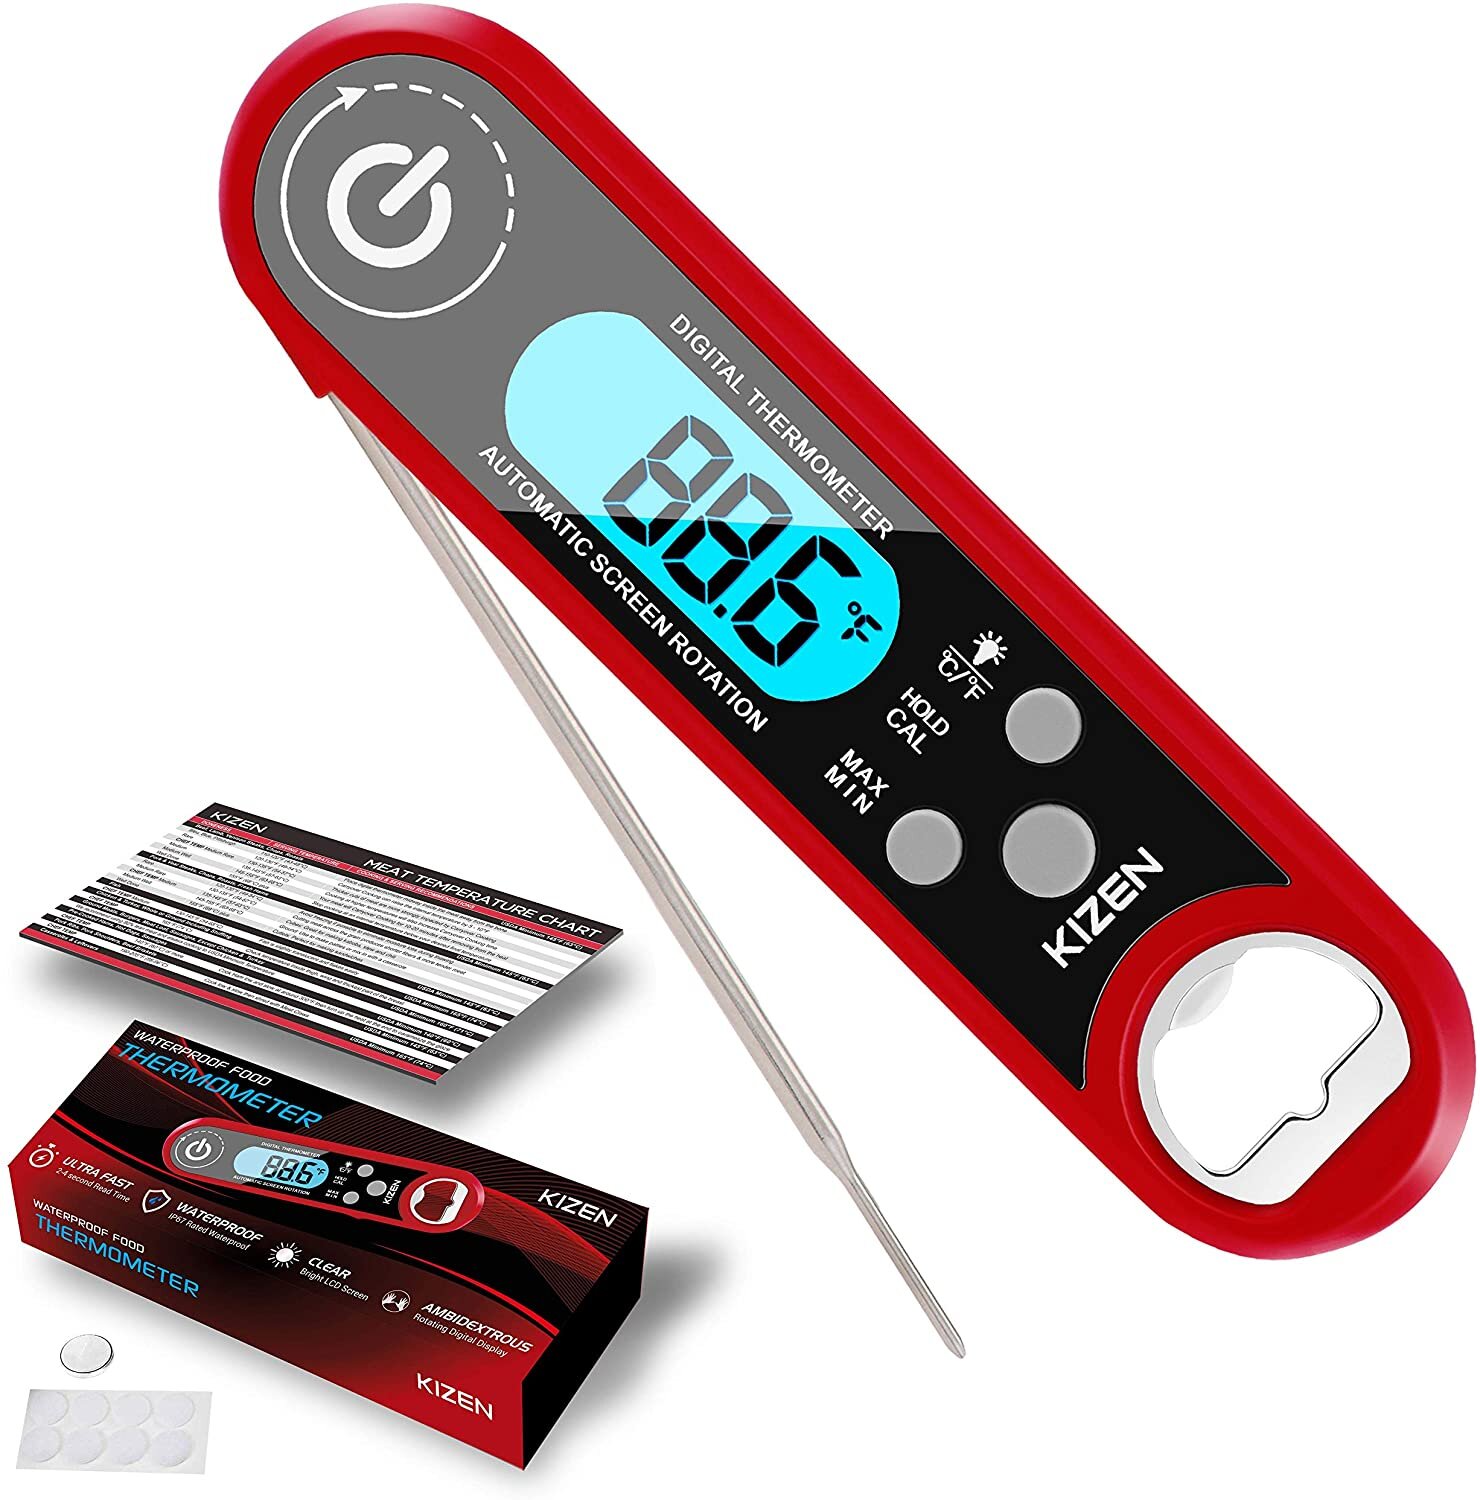 Kizen Instant Read Meat Thermometer - Folding Waterproof Thermometer with LCD Display Backlight & Calibration, Red